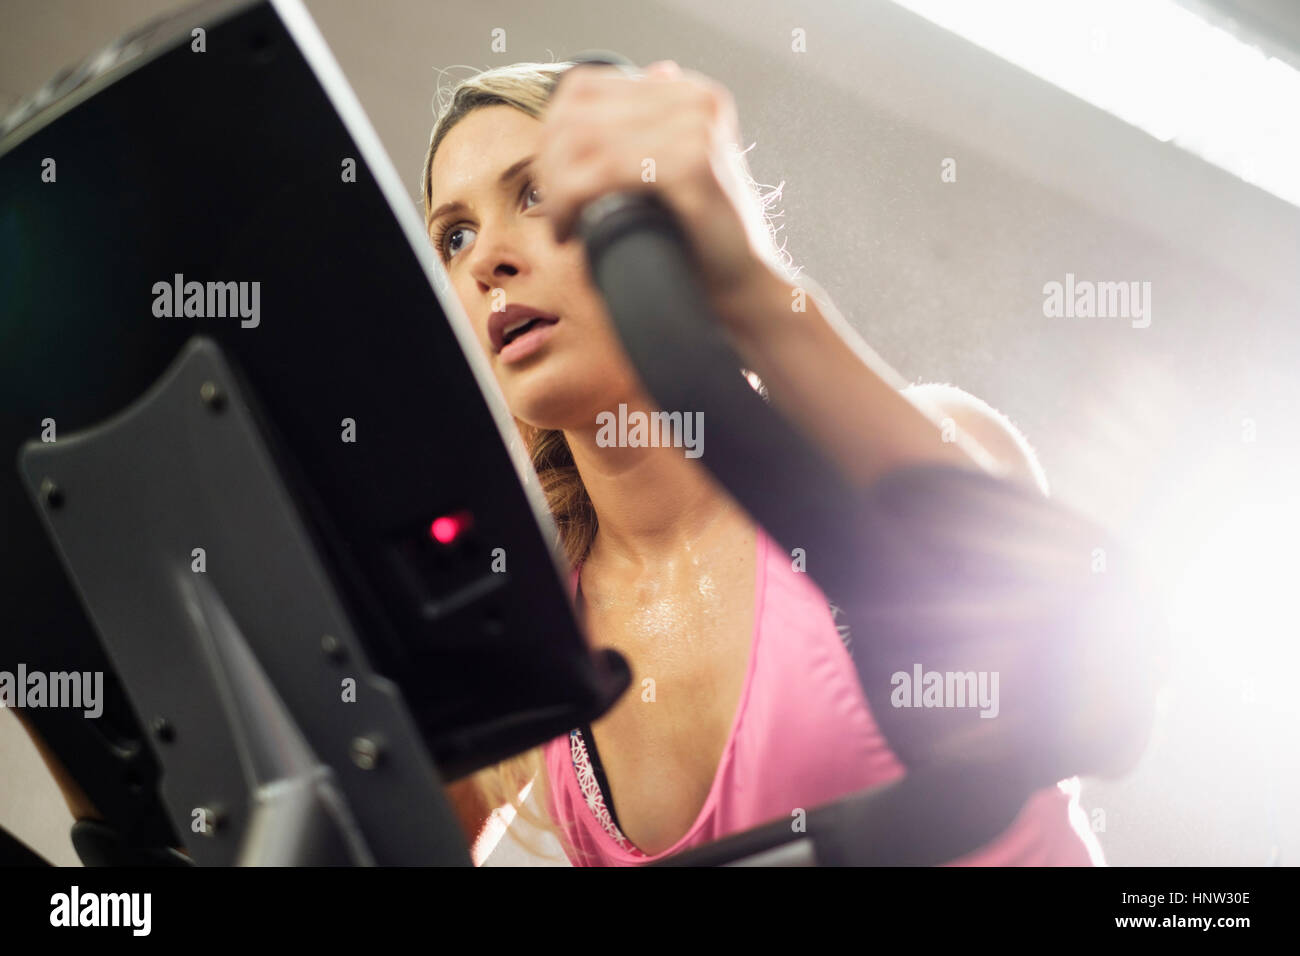 Mixed Race woman riding stationary bicycle Stock Photo